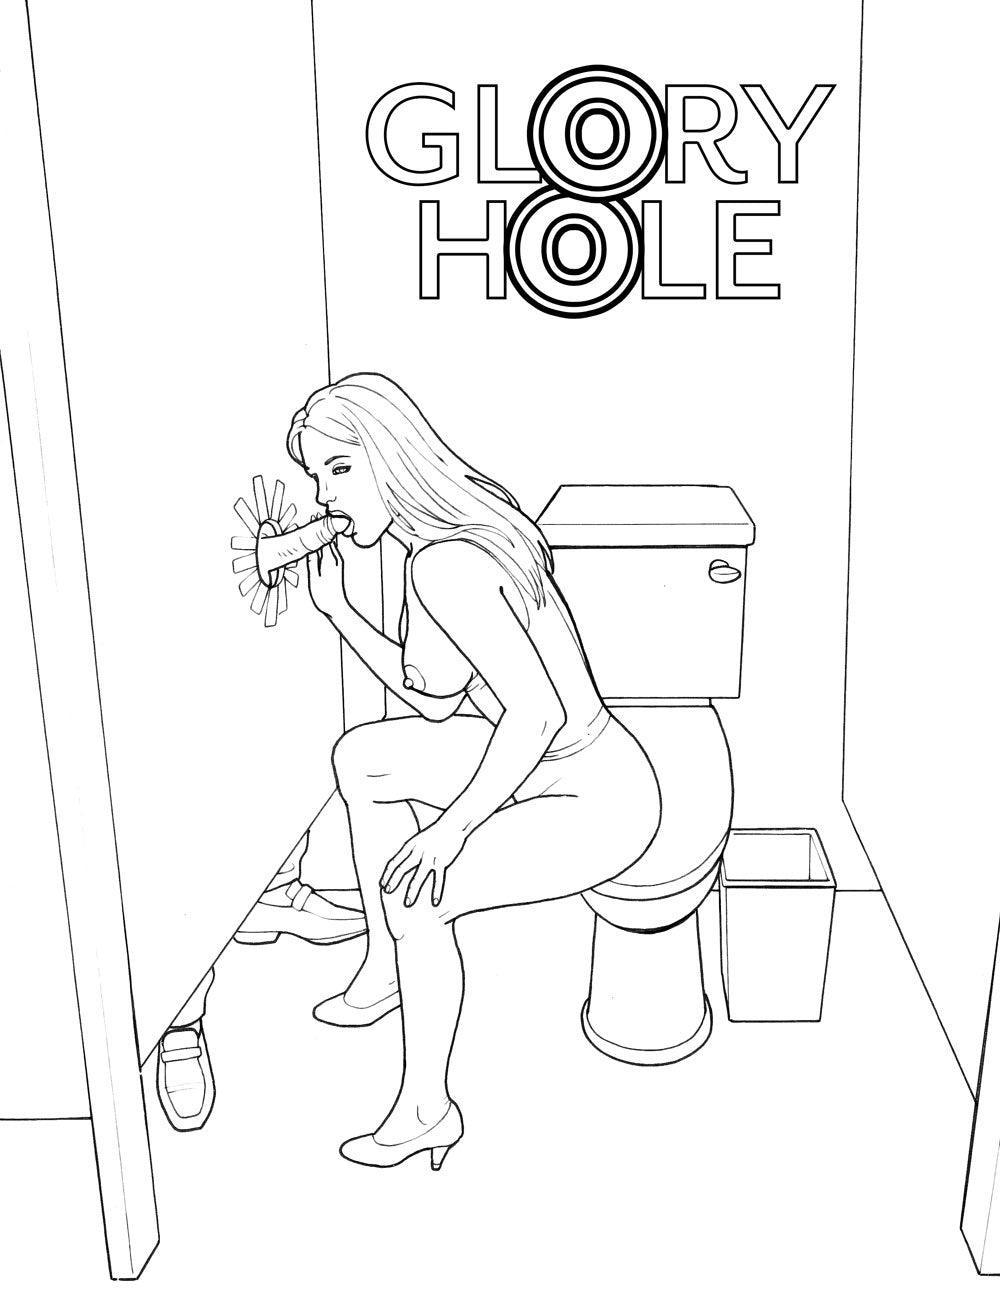 The Dirtiest Colouring Book Ever - Take A Peek